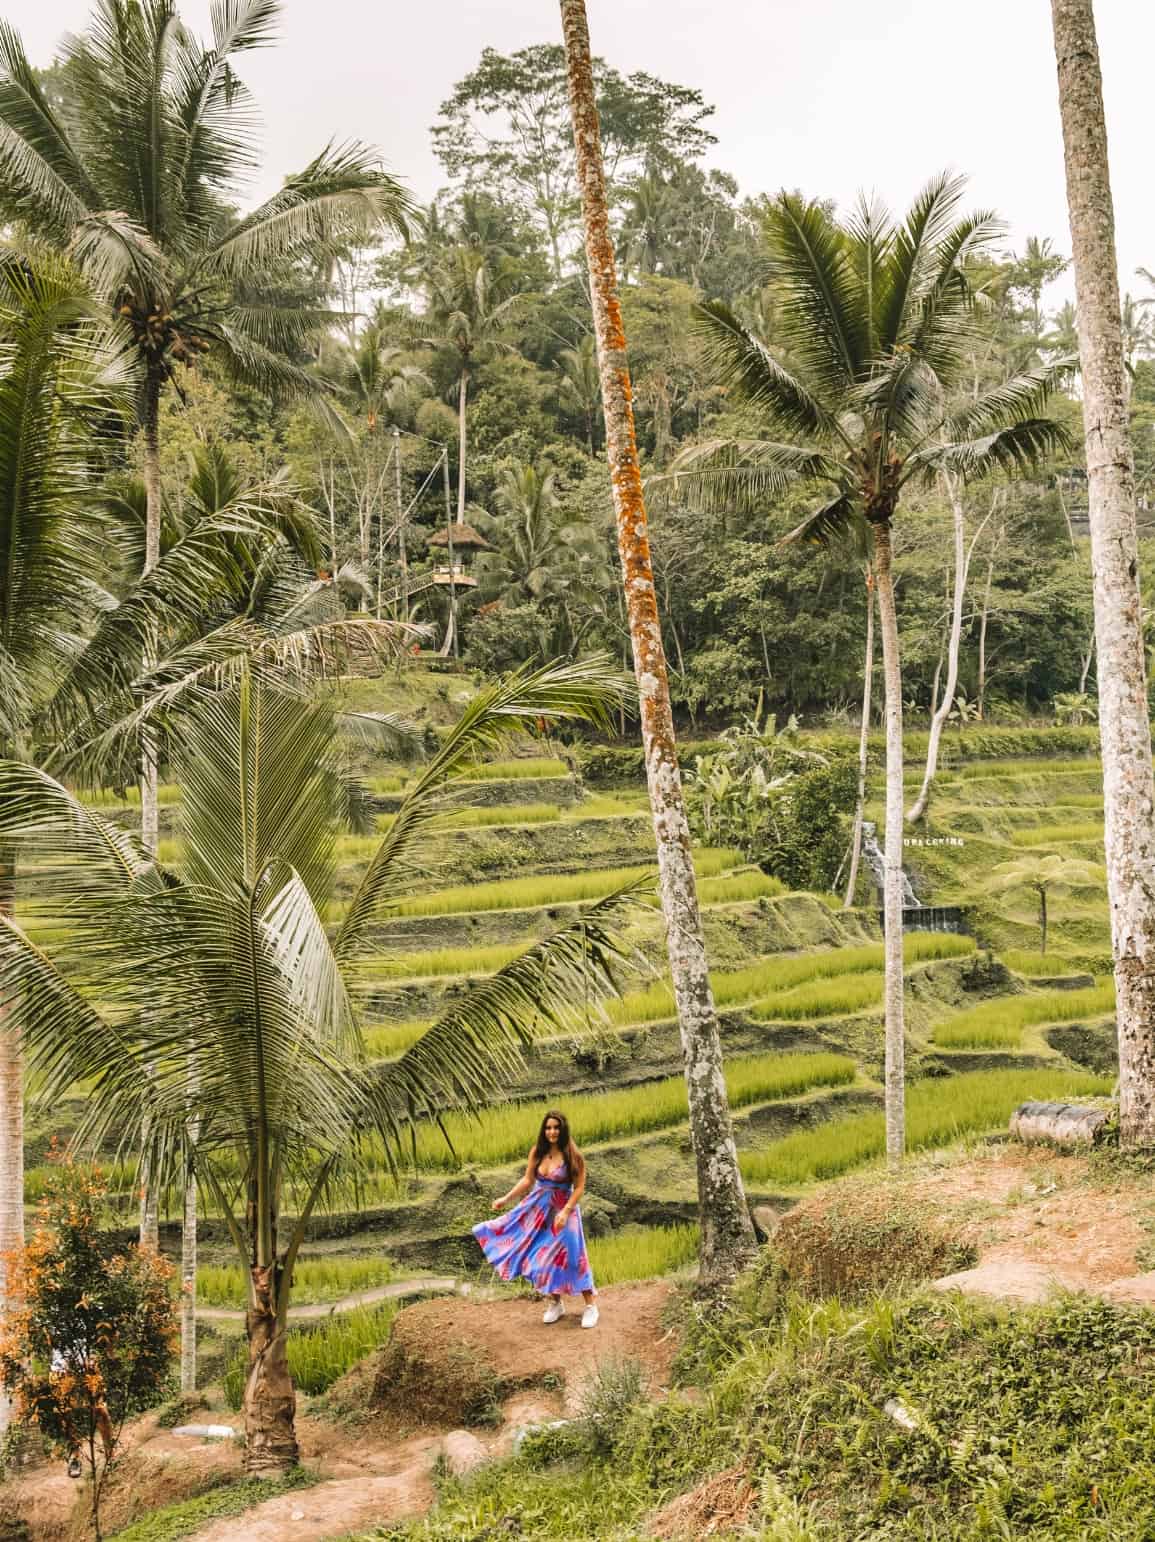 Blog post about spending 4 days in Ubud